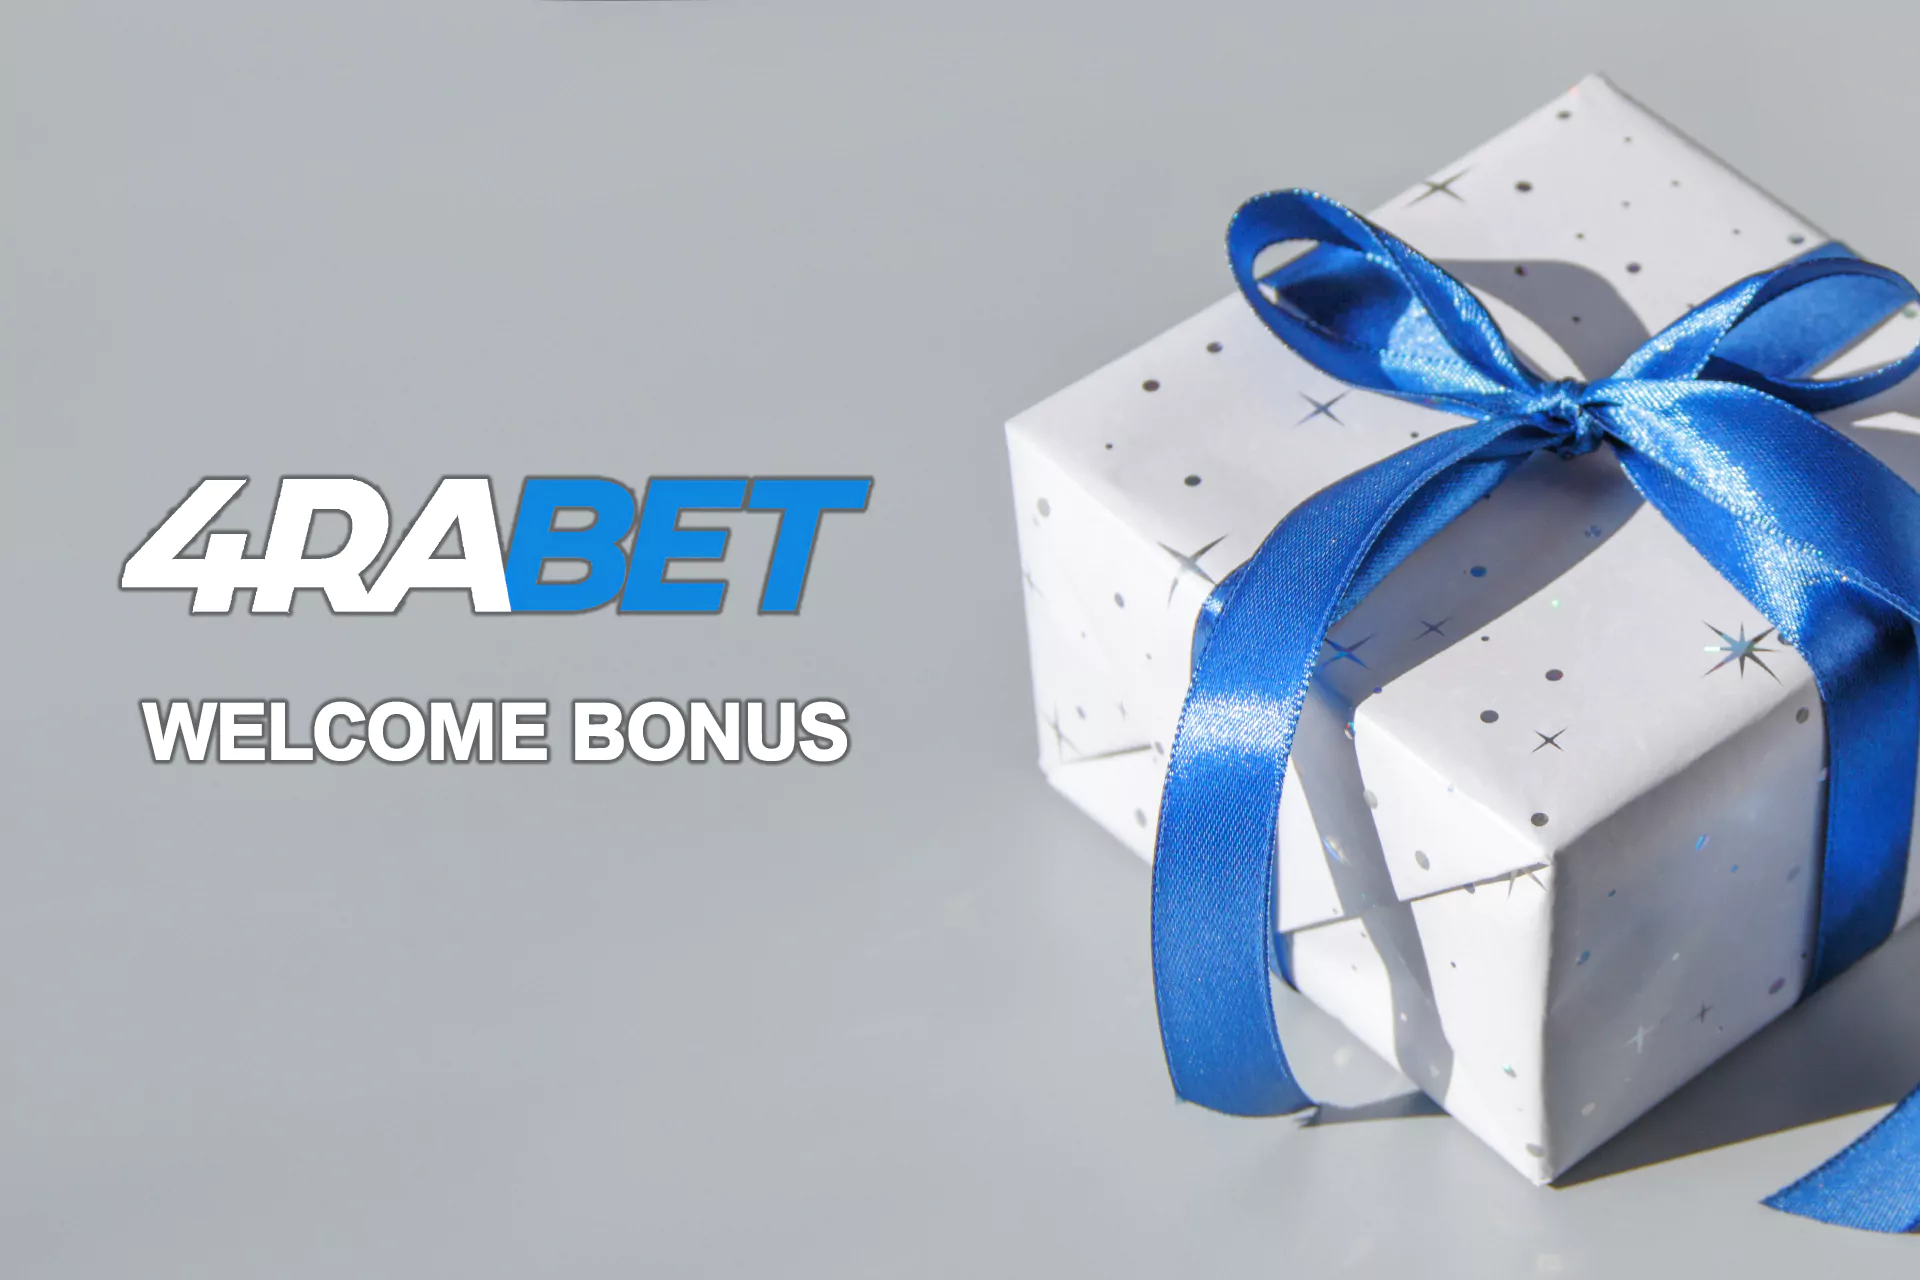 After you sign up you can get the welcome bonus and use it for betting.